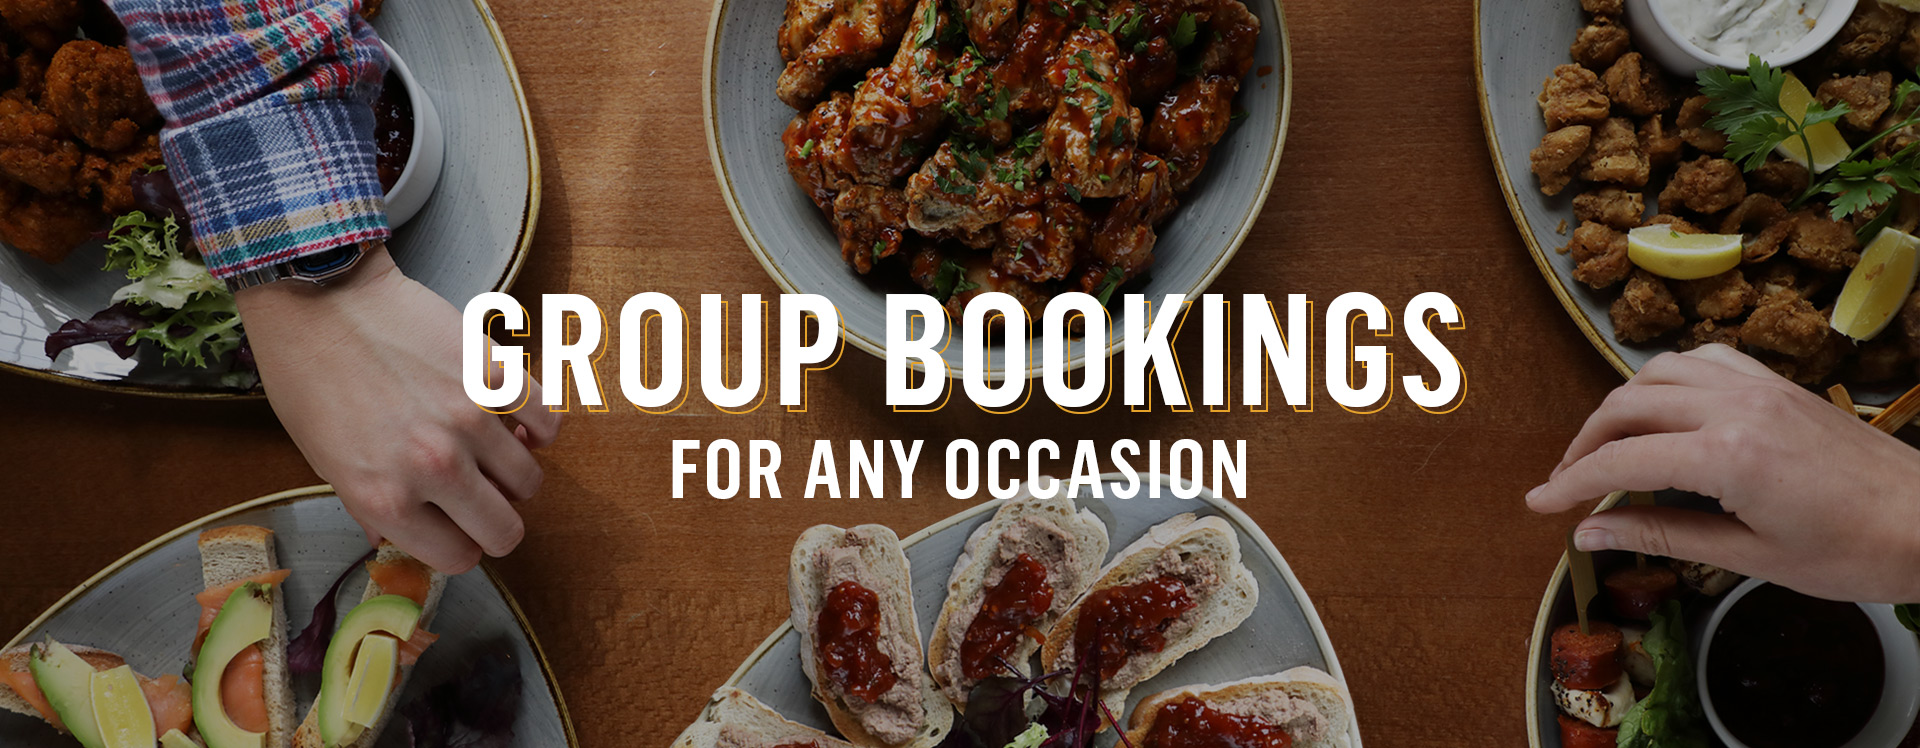 Group Bookings at The Last Drop